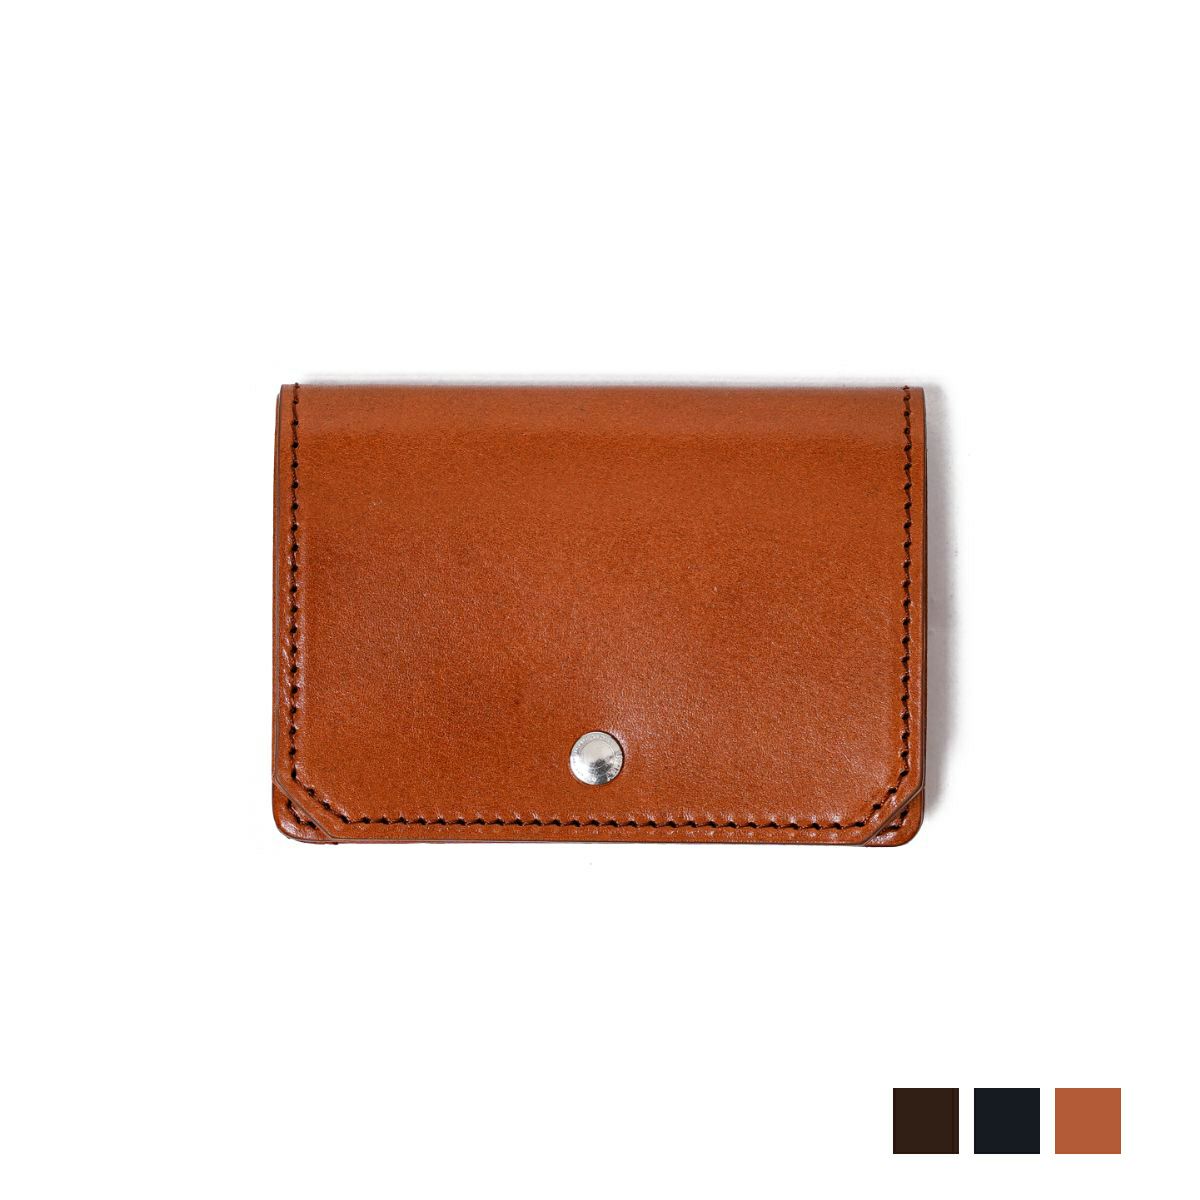 WISCE (ワイス) Embossing Leather Card Case カードケース UNBYSTORE